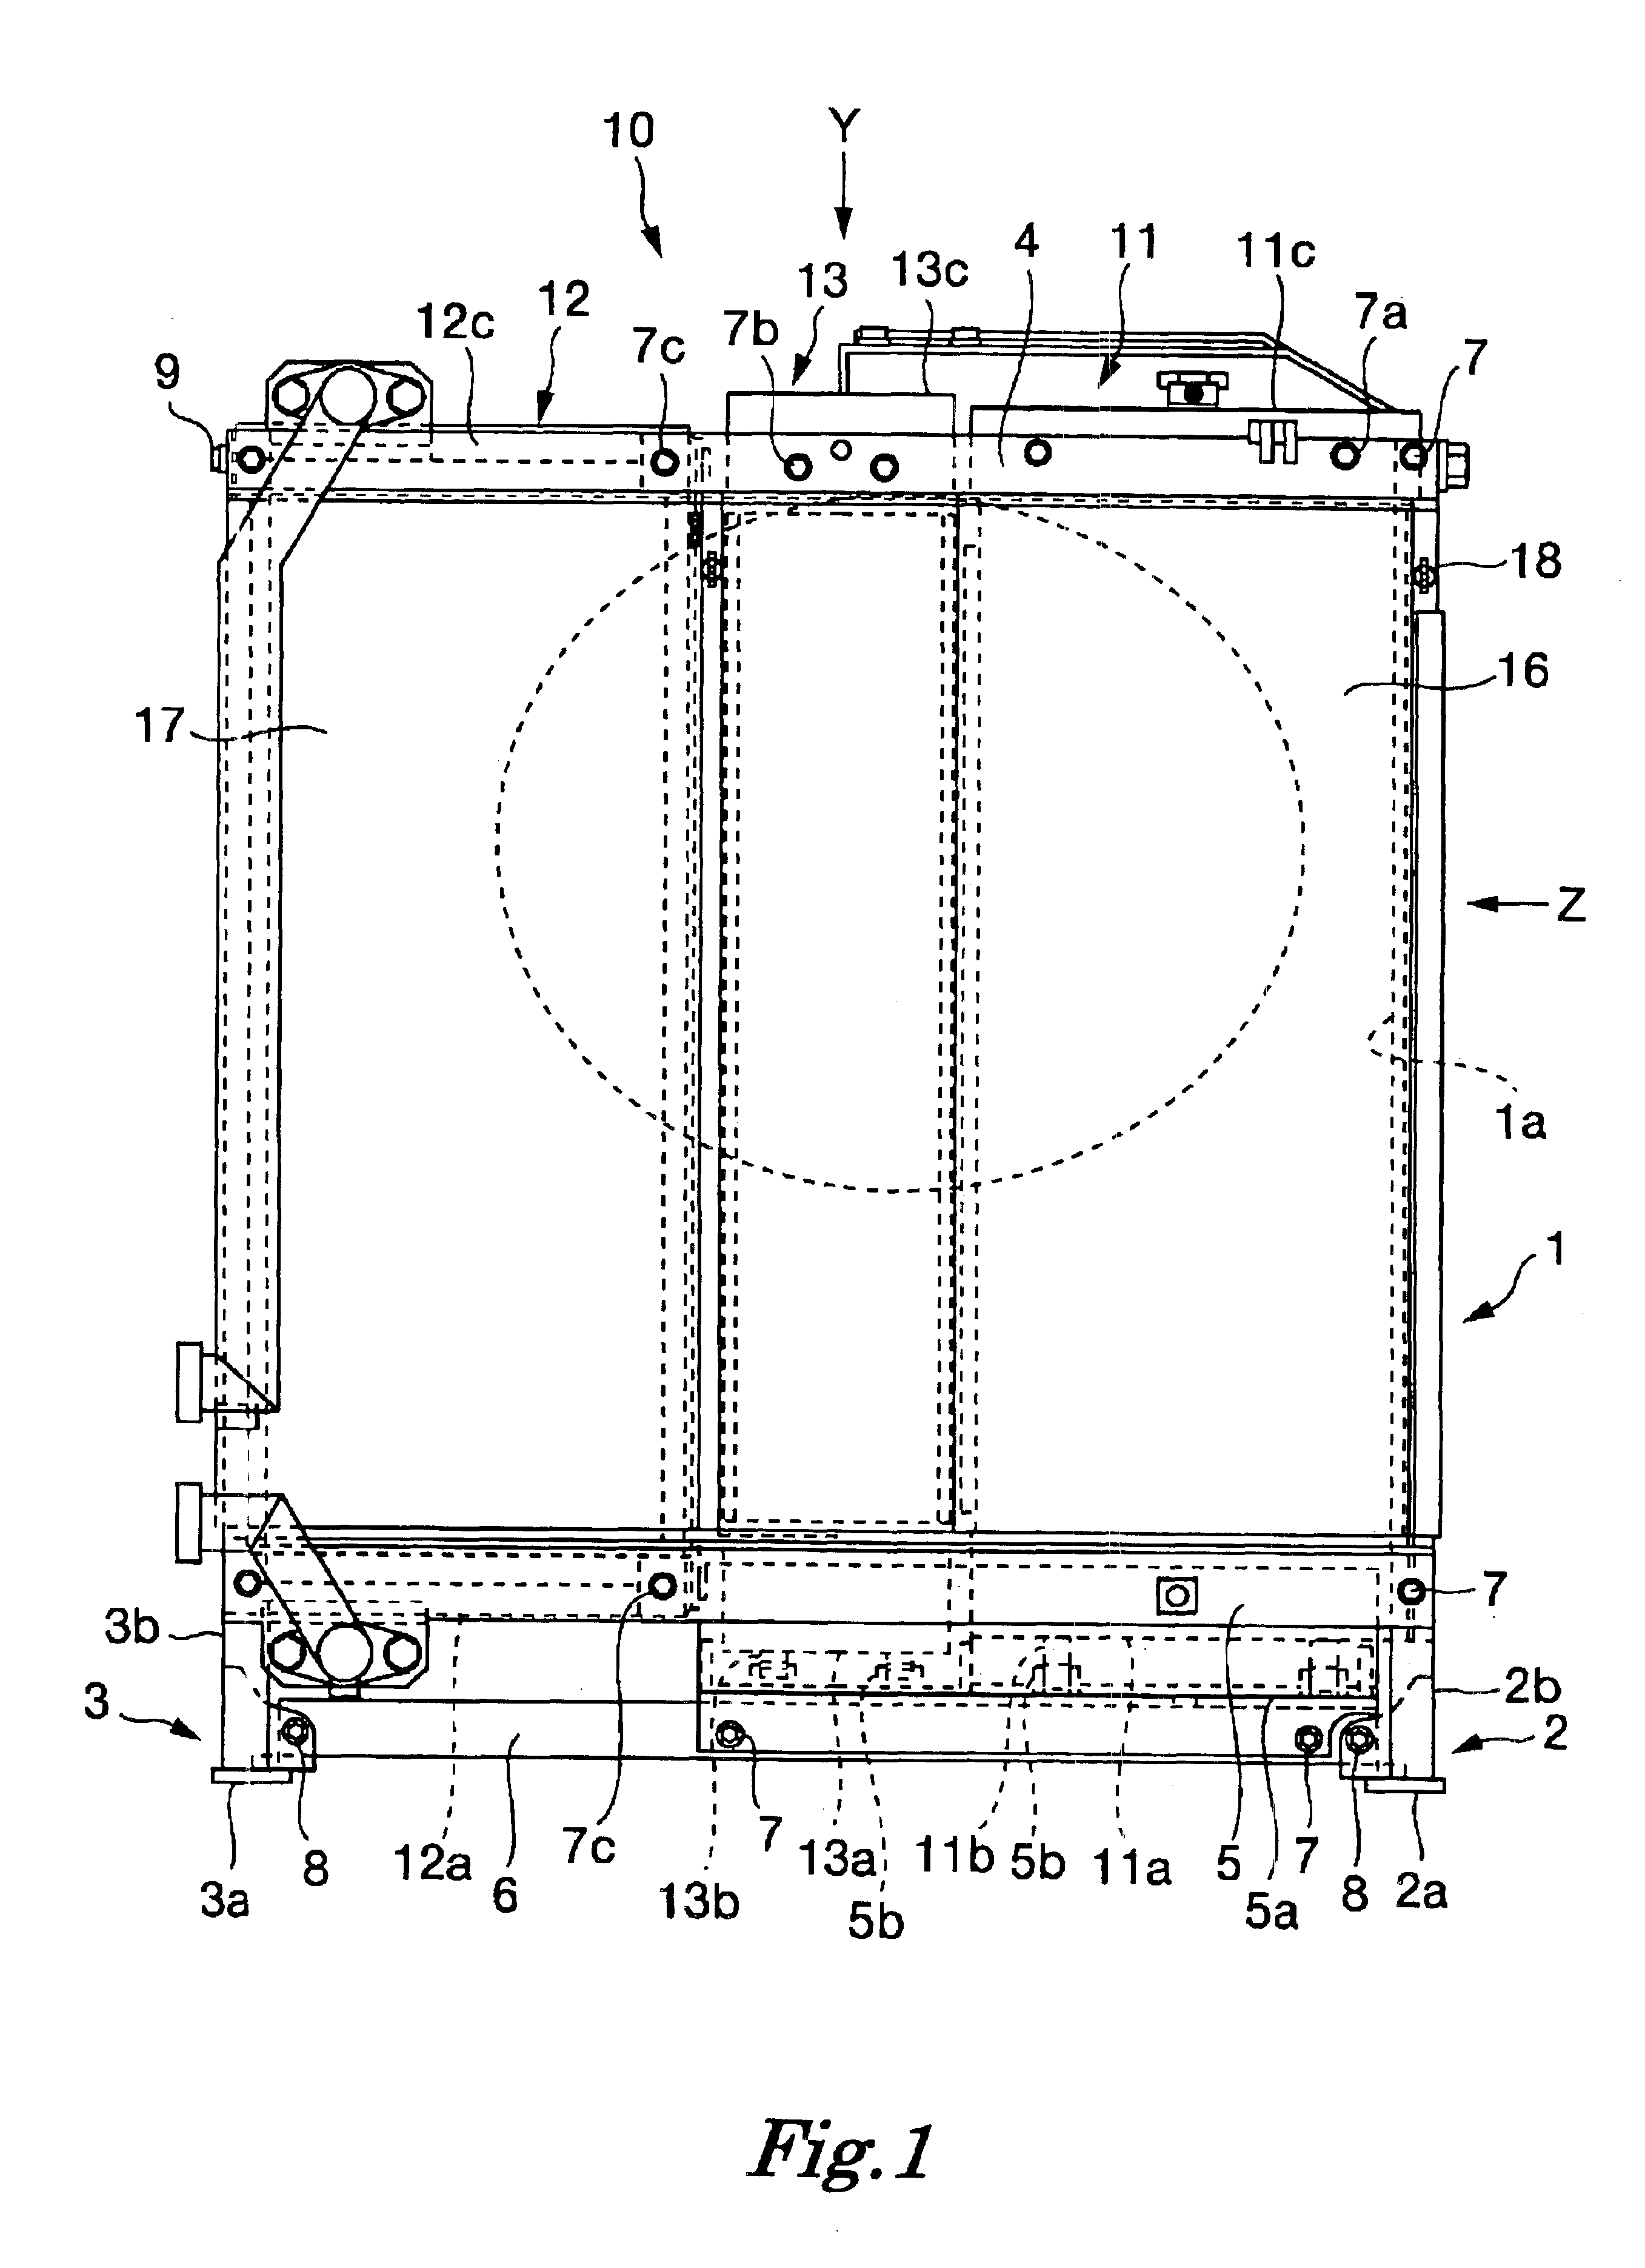 Cooling apparatus for a work machine